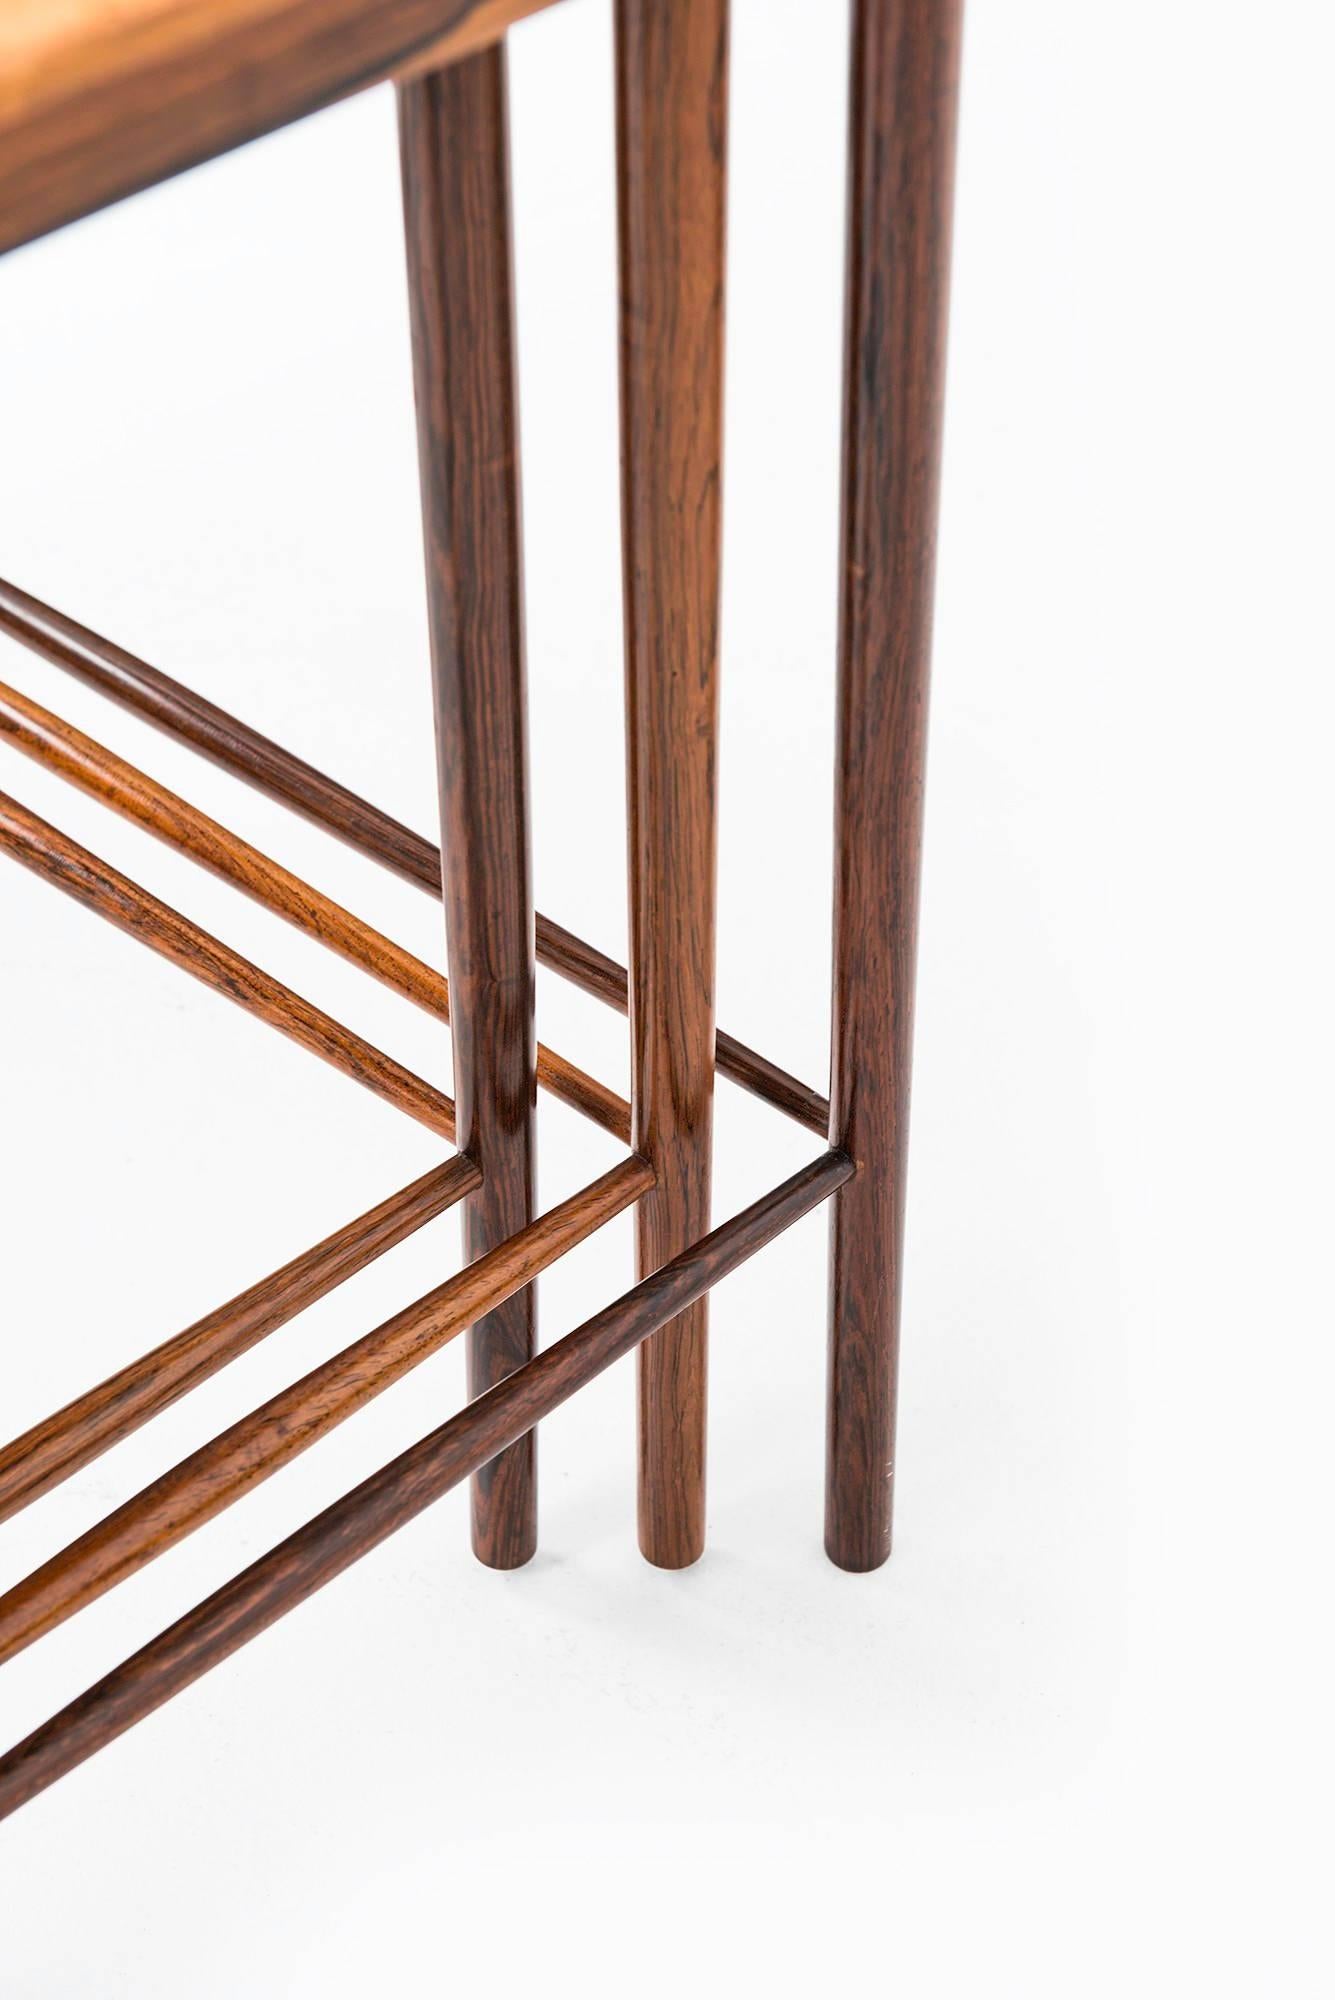 Grete Jalk Nesting Tables in Rosewood by P. Jeppesen in Denmark In Excellent Condition In Limhamn, Skåne län